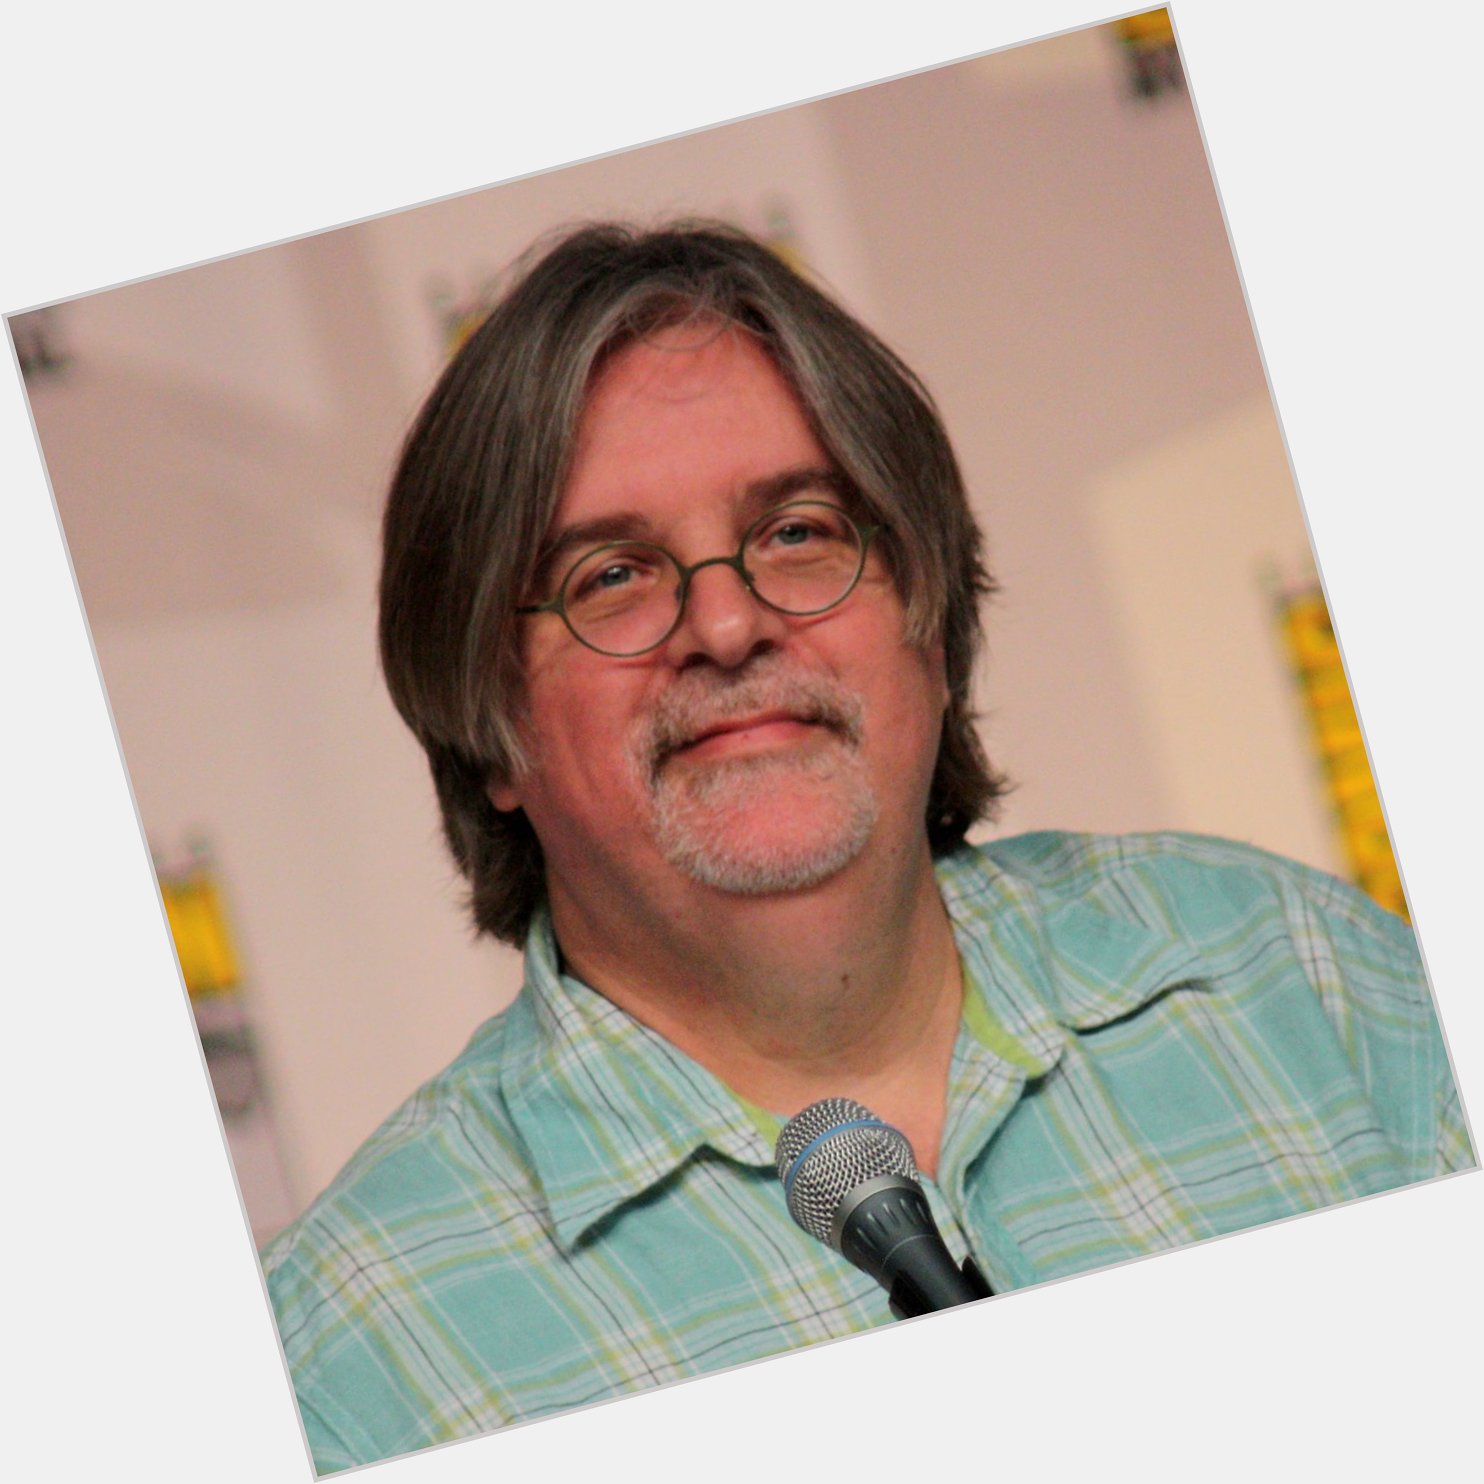 Happy Birthday, Matt Groening. The man who created the Simpsons. I\m a real fan of the Simpsons. 